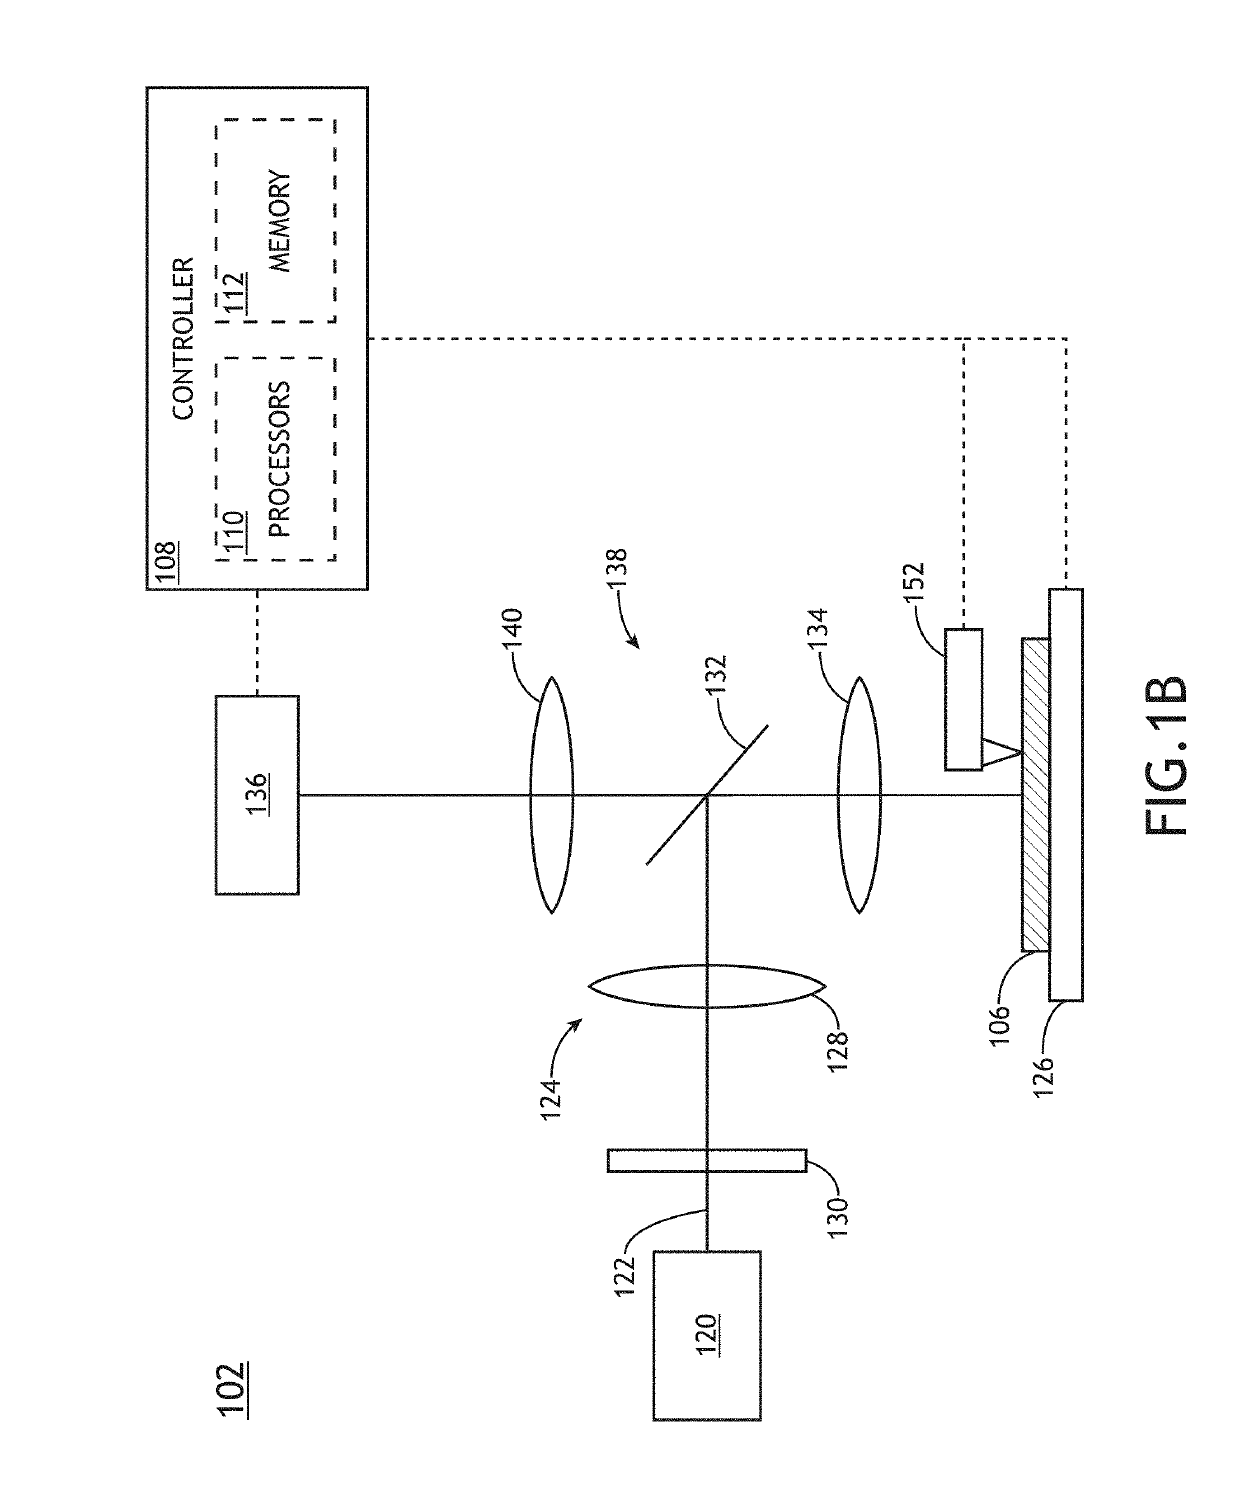 Targeted Recall of Semiconductor Devices Based on Manufacturing Data